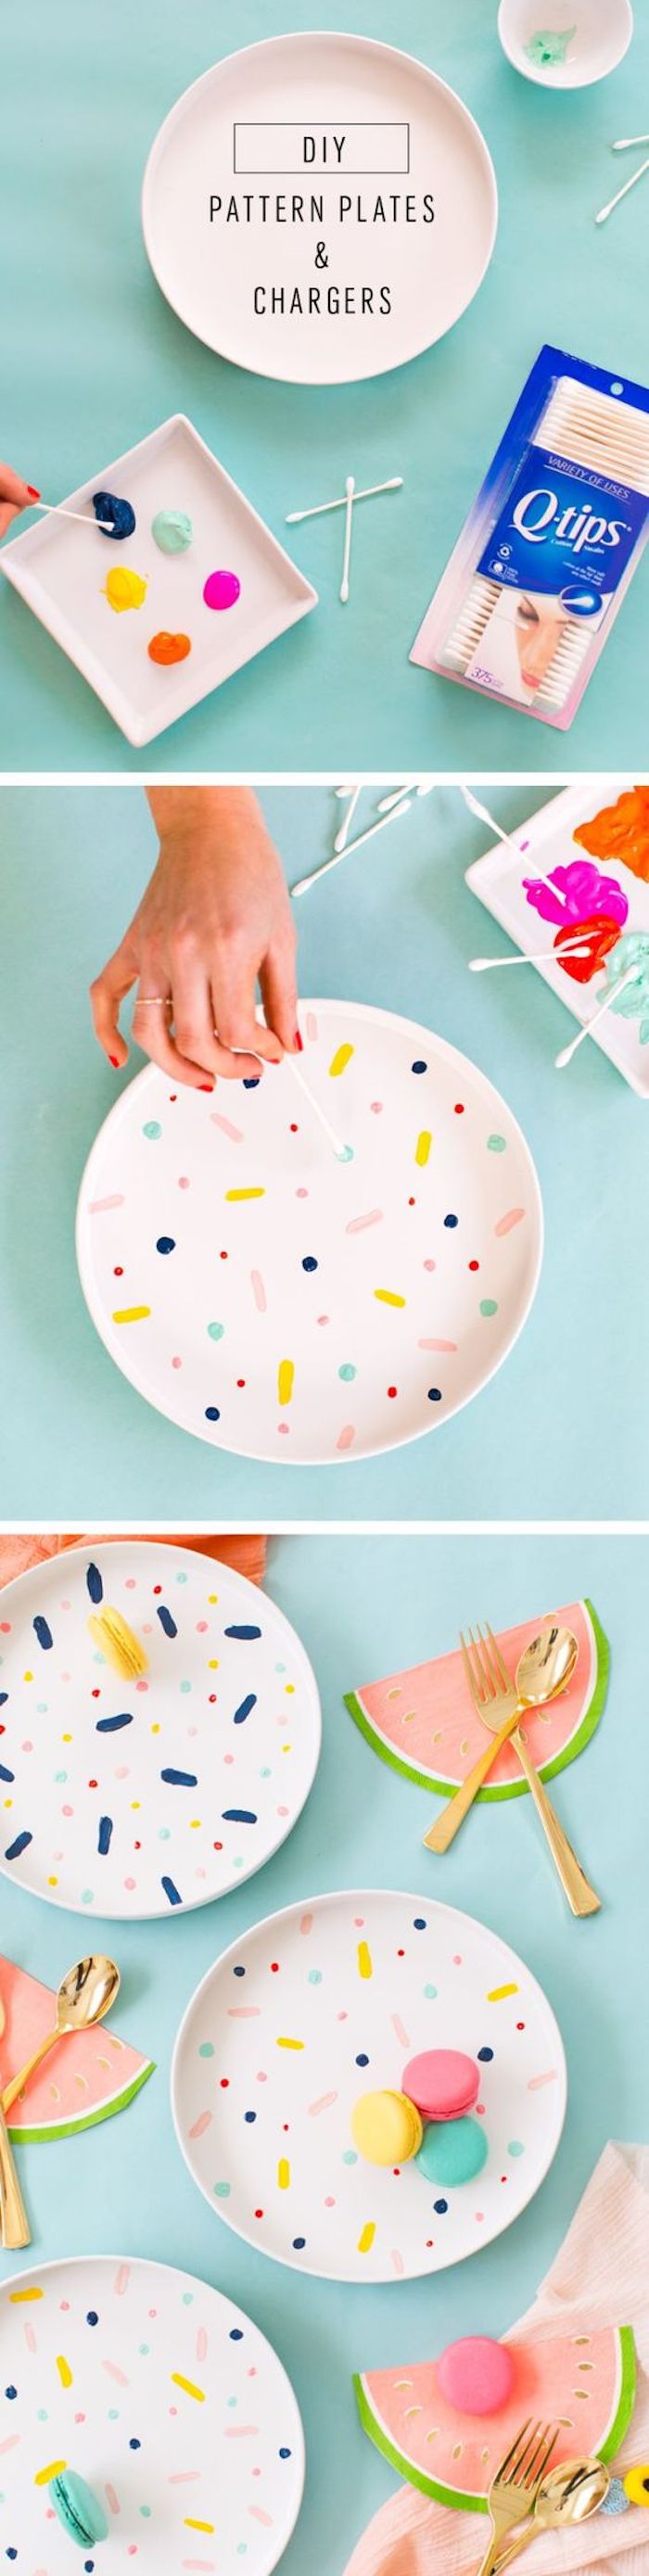 diy pattern plates, crafts to do when bored, yellow and blue, red and orange paint